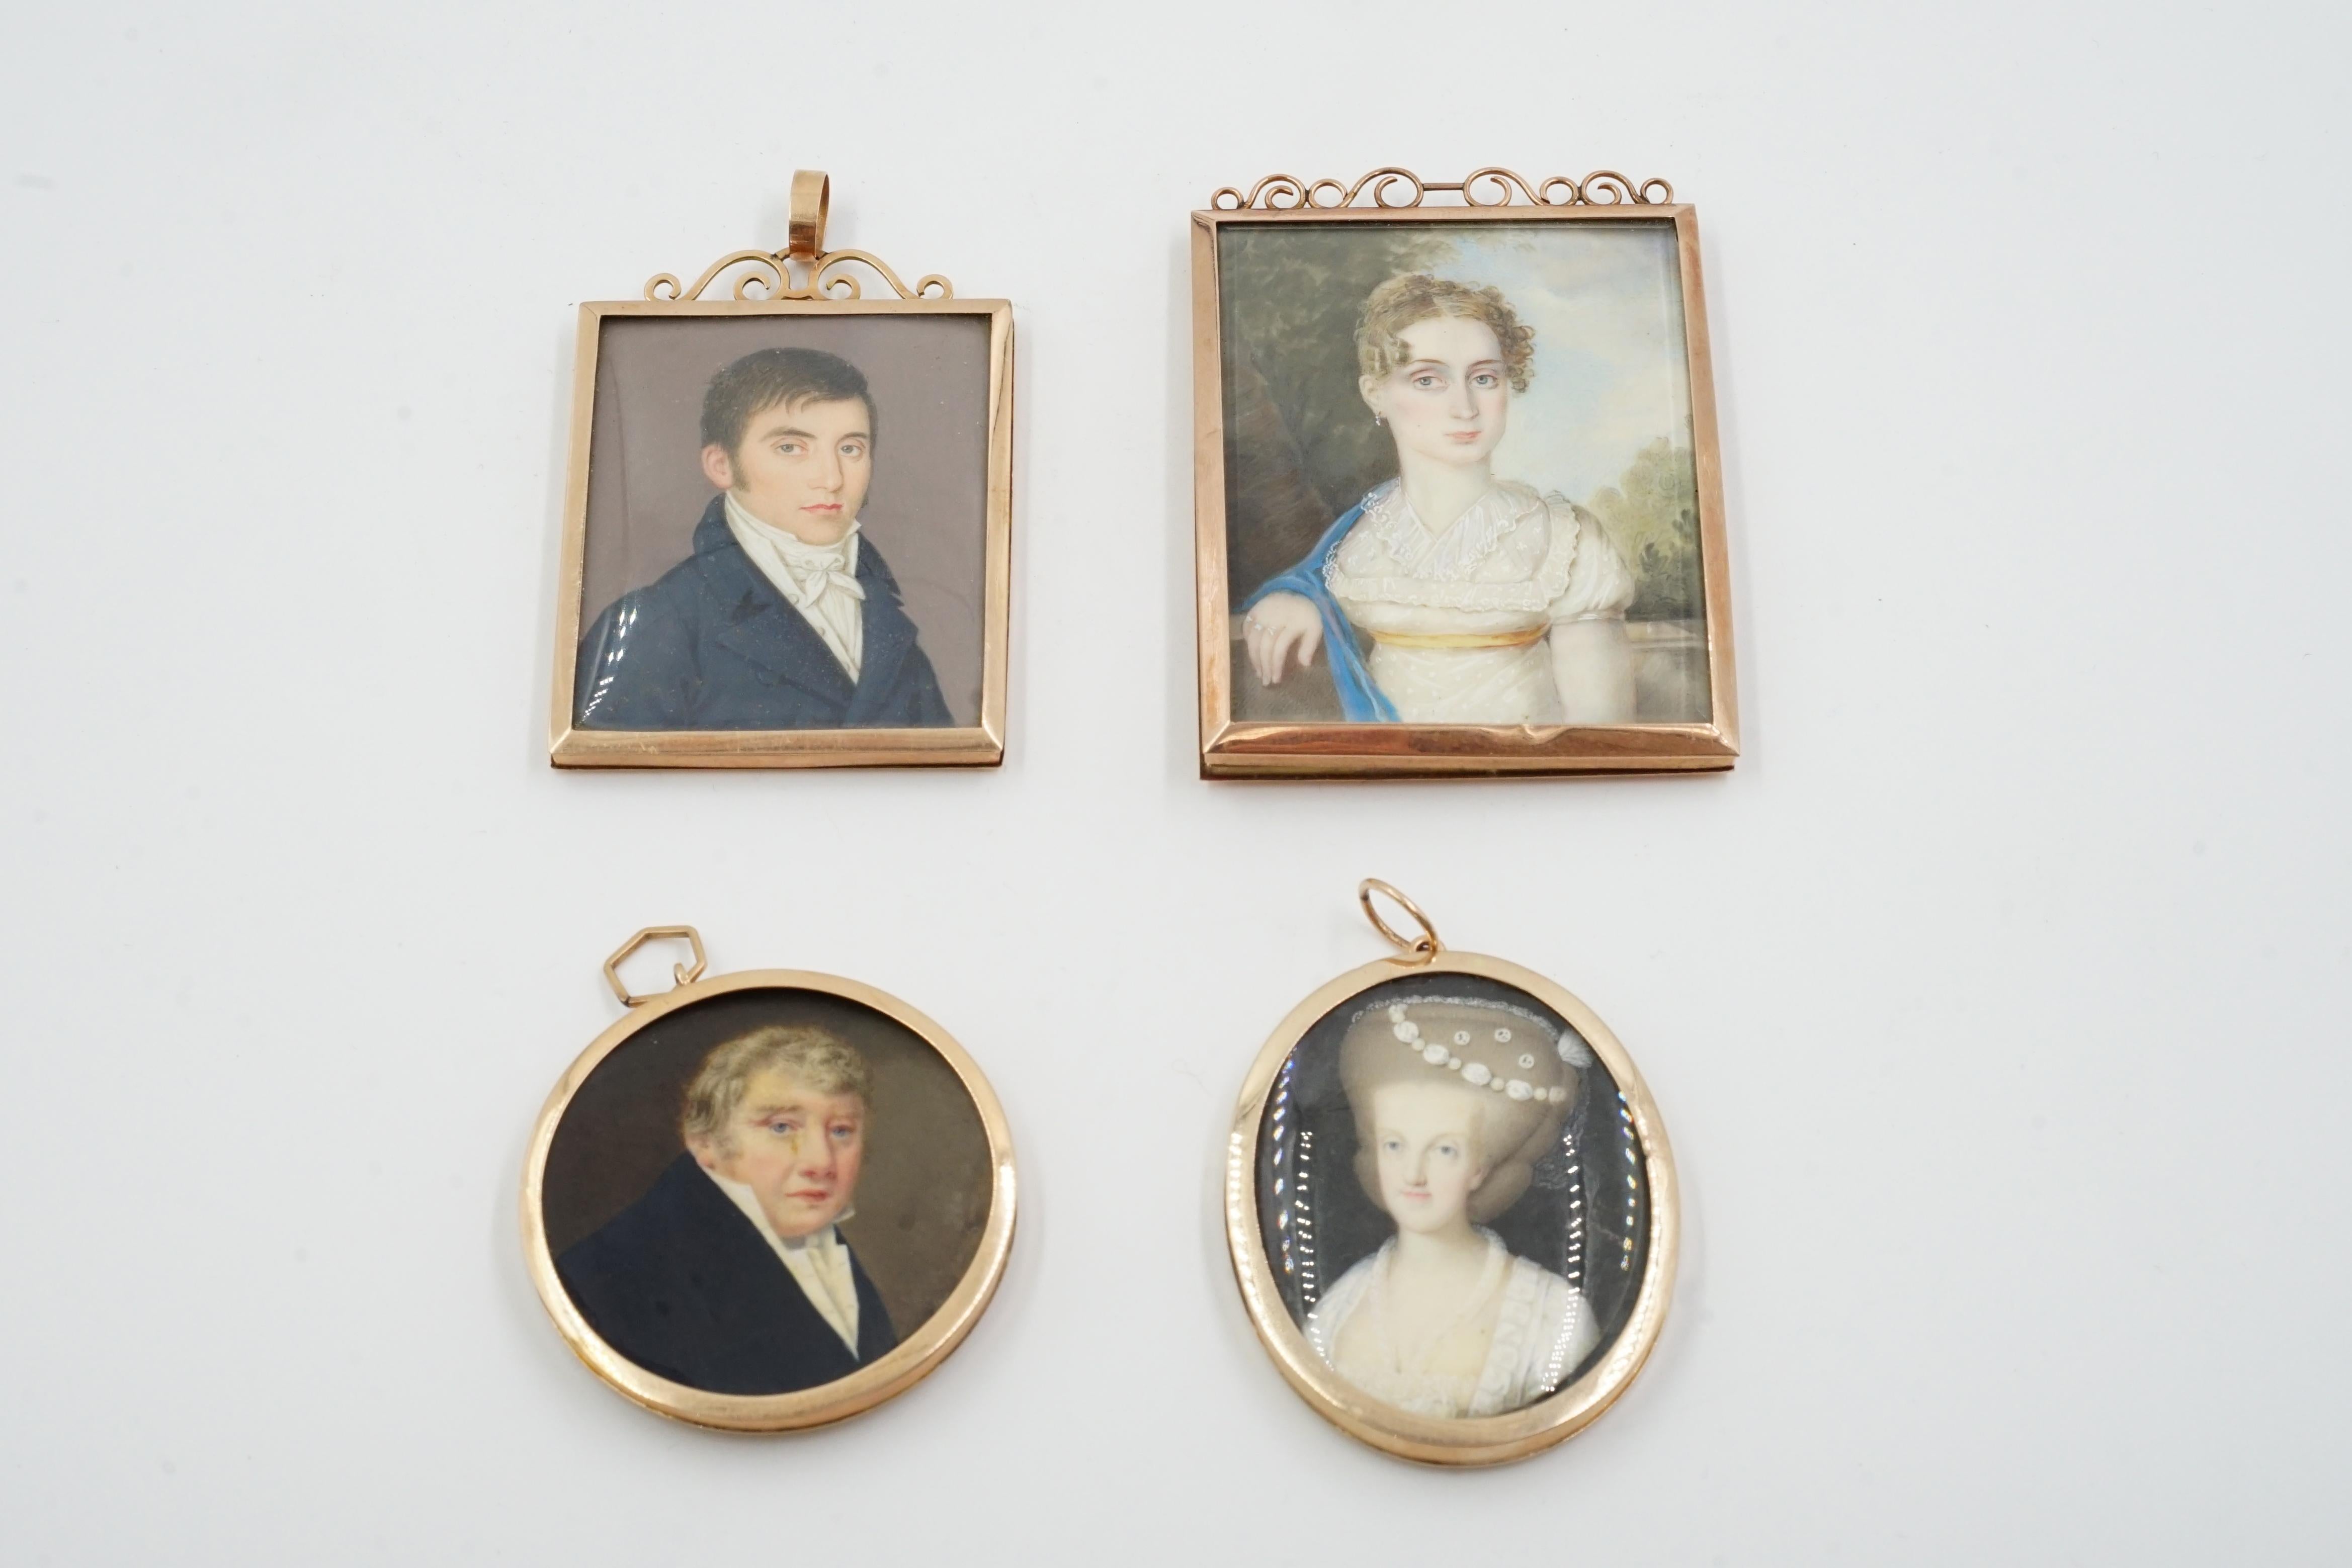 Miniature portrait framed in gold
Hand painted miniature portraits
Origin England Circa 1830
There are 4 portraits hand painted and framed in red gold
(2 men and 2 ladies) each one is protected by glass
Some of them have a monogram
They are from the